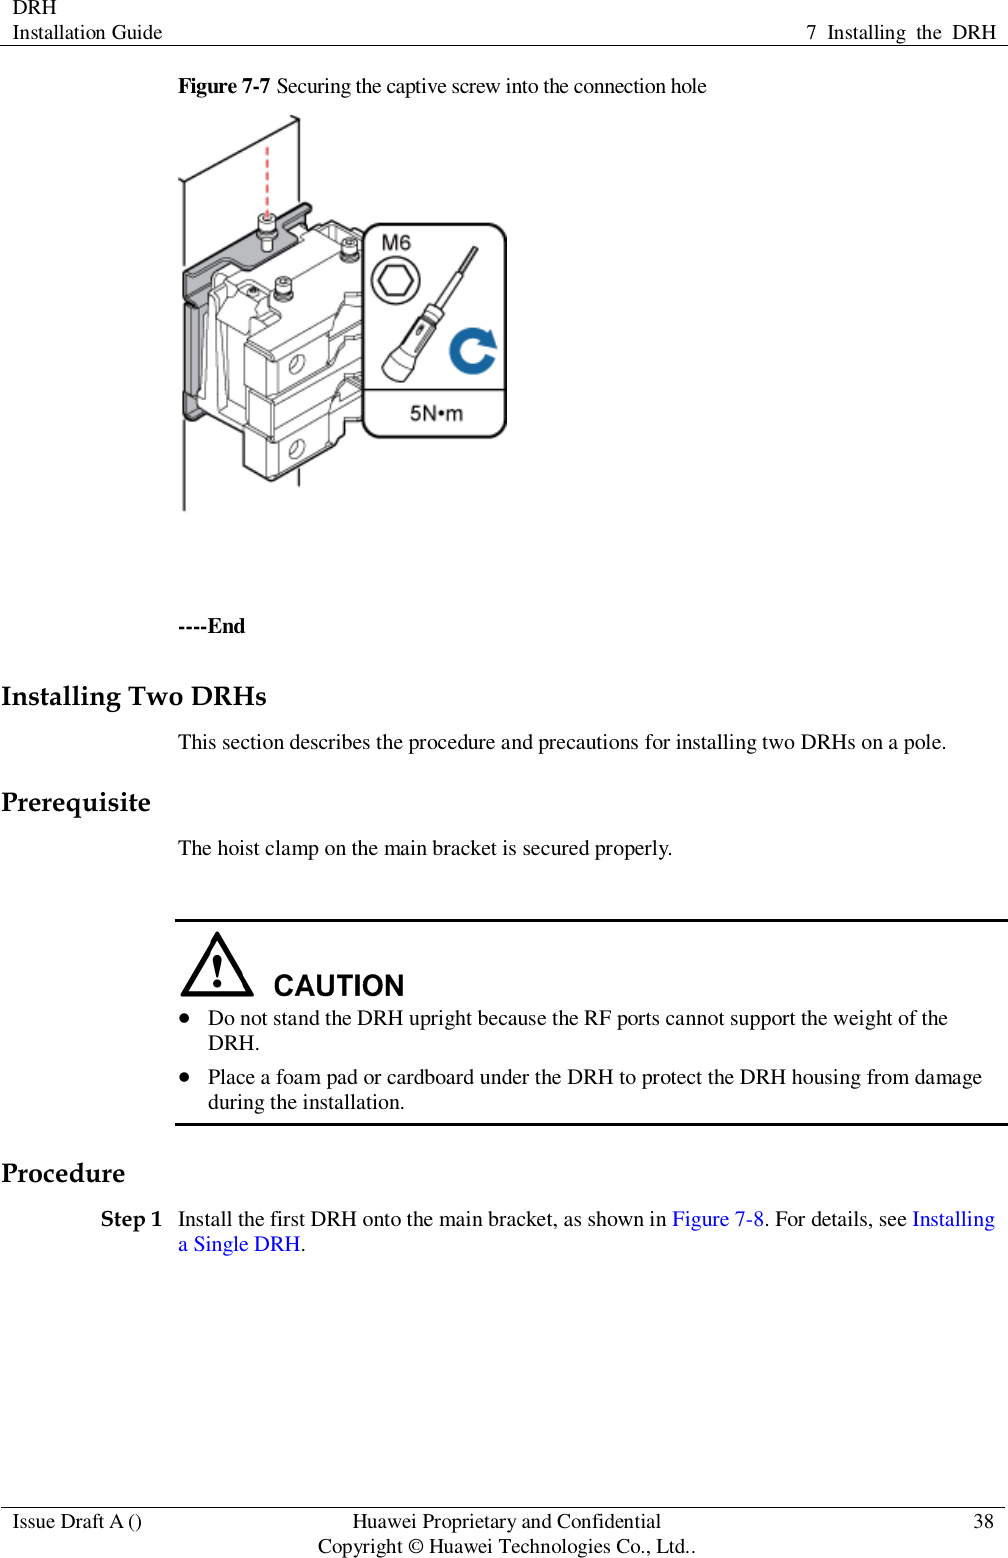 DRH   Installation Guide 7  Installing  the  DRH  Issue Draft A () Huawei Proprietary and Confidential                                     Copyright © Huawei Technologies Co., Ltd.. 38  Figure 7-7 Securing the captive screw into the connection hole   ----End Installing Two DRHs This section describes the procedure and precautions for installing two DRHs on a pole. Prerequisite The hoist clamp on the main bracket is secured properly.    Do not stand the DRH upright because the RF ports cannot support the weight of the DRH.  Place a foam pad or cardboard under the DRH to protect the DRH housing from damage during the installation. Procedure Step 1 Install the first DRH onto the main bracket, as shown in Figure 7-8. For details, see Installing a Single DRH. 